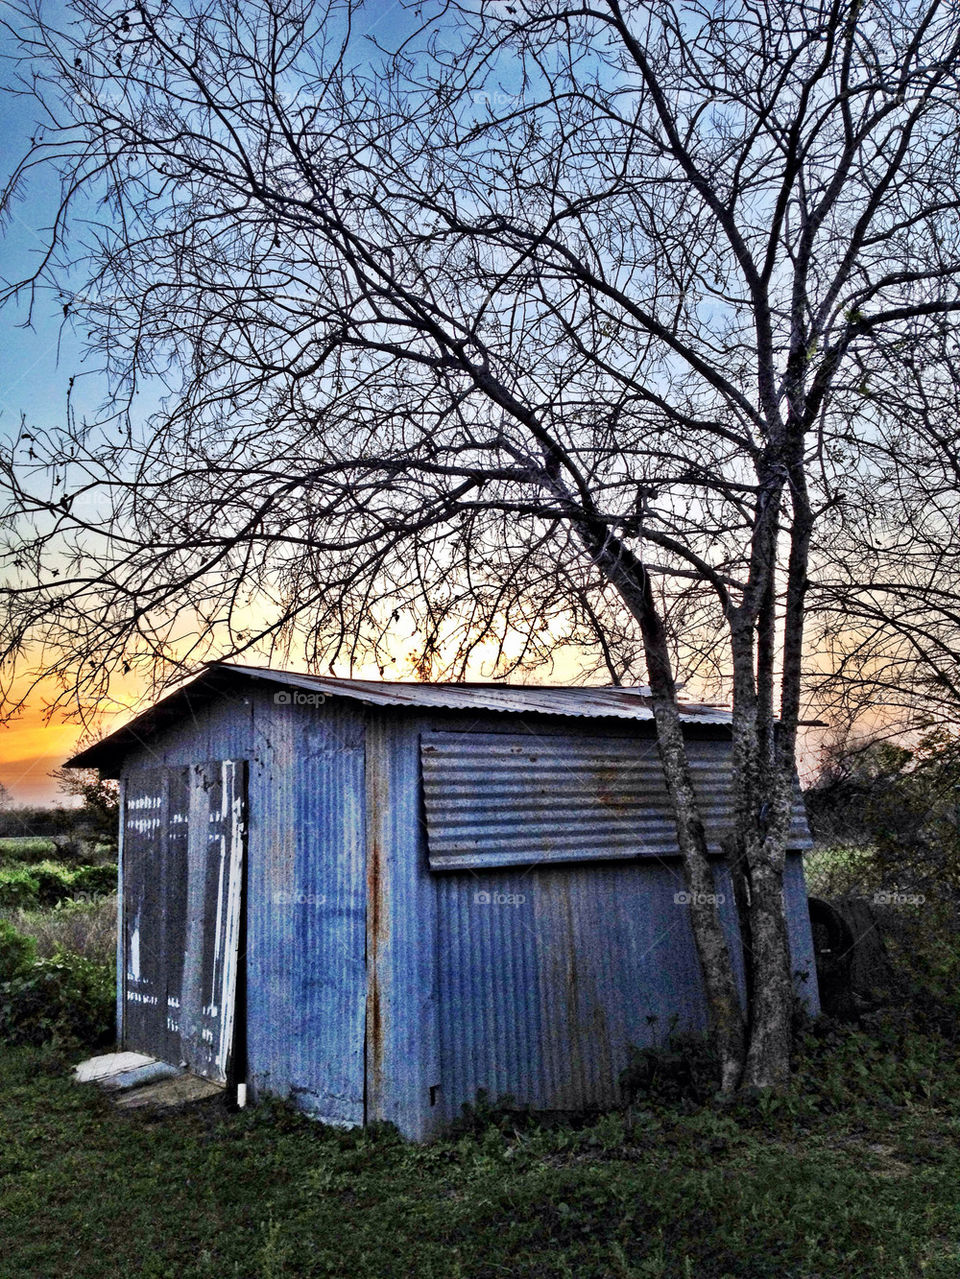 sunset tool shed texas by an06527